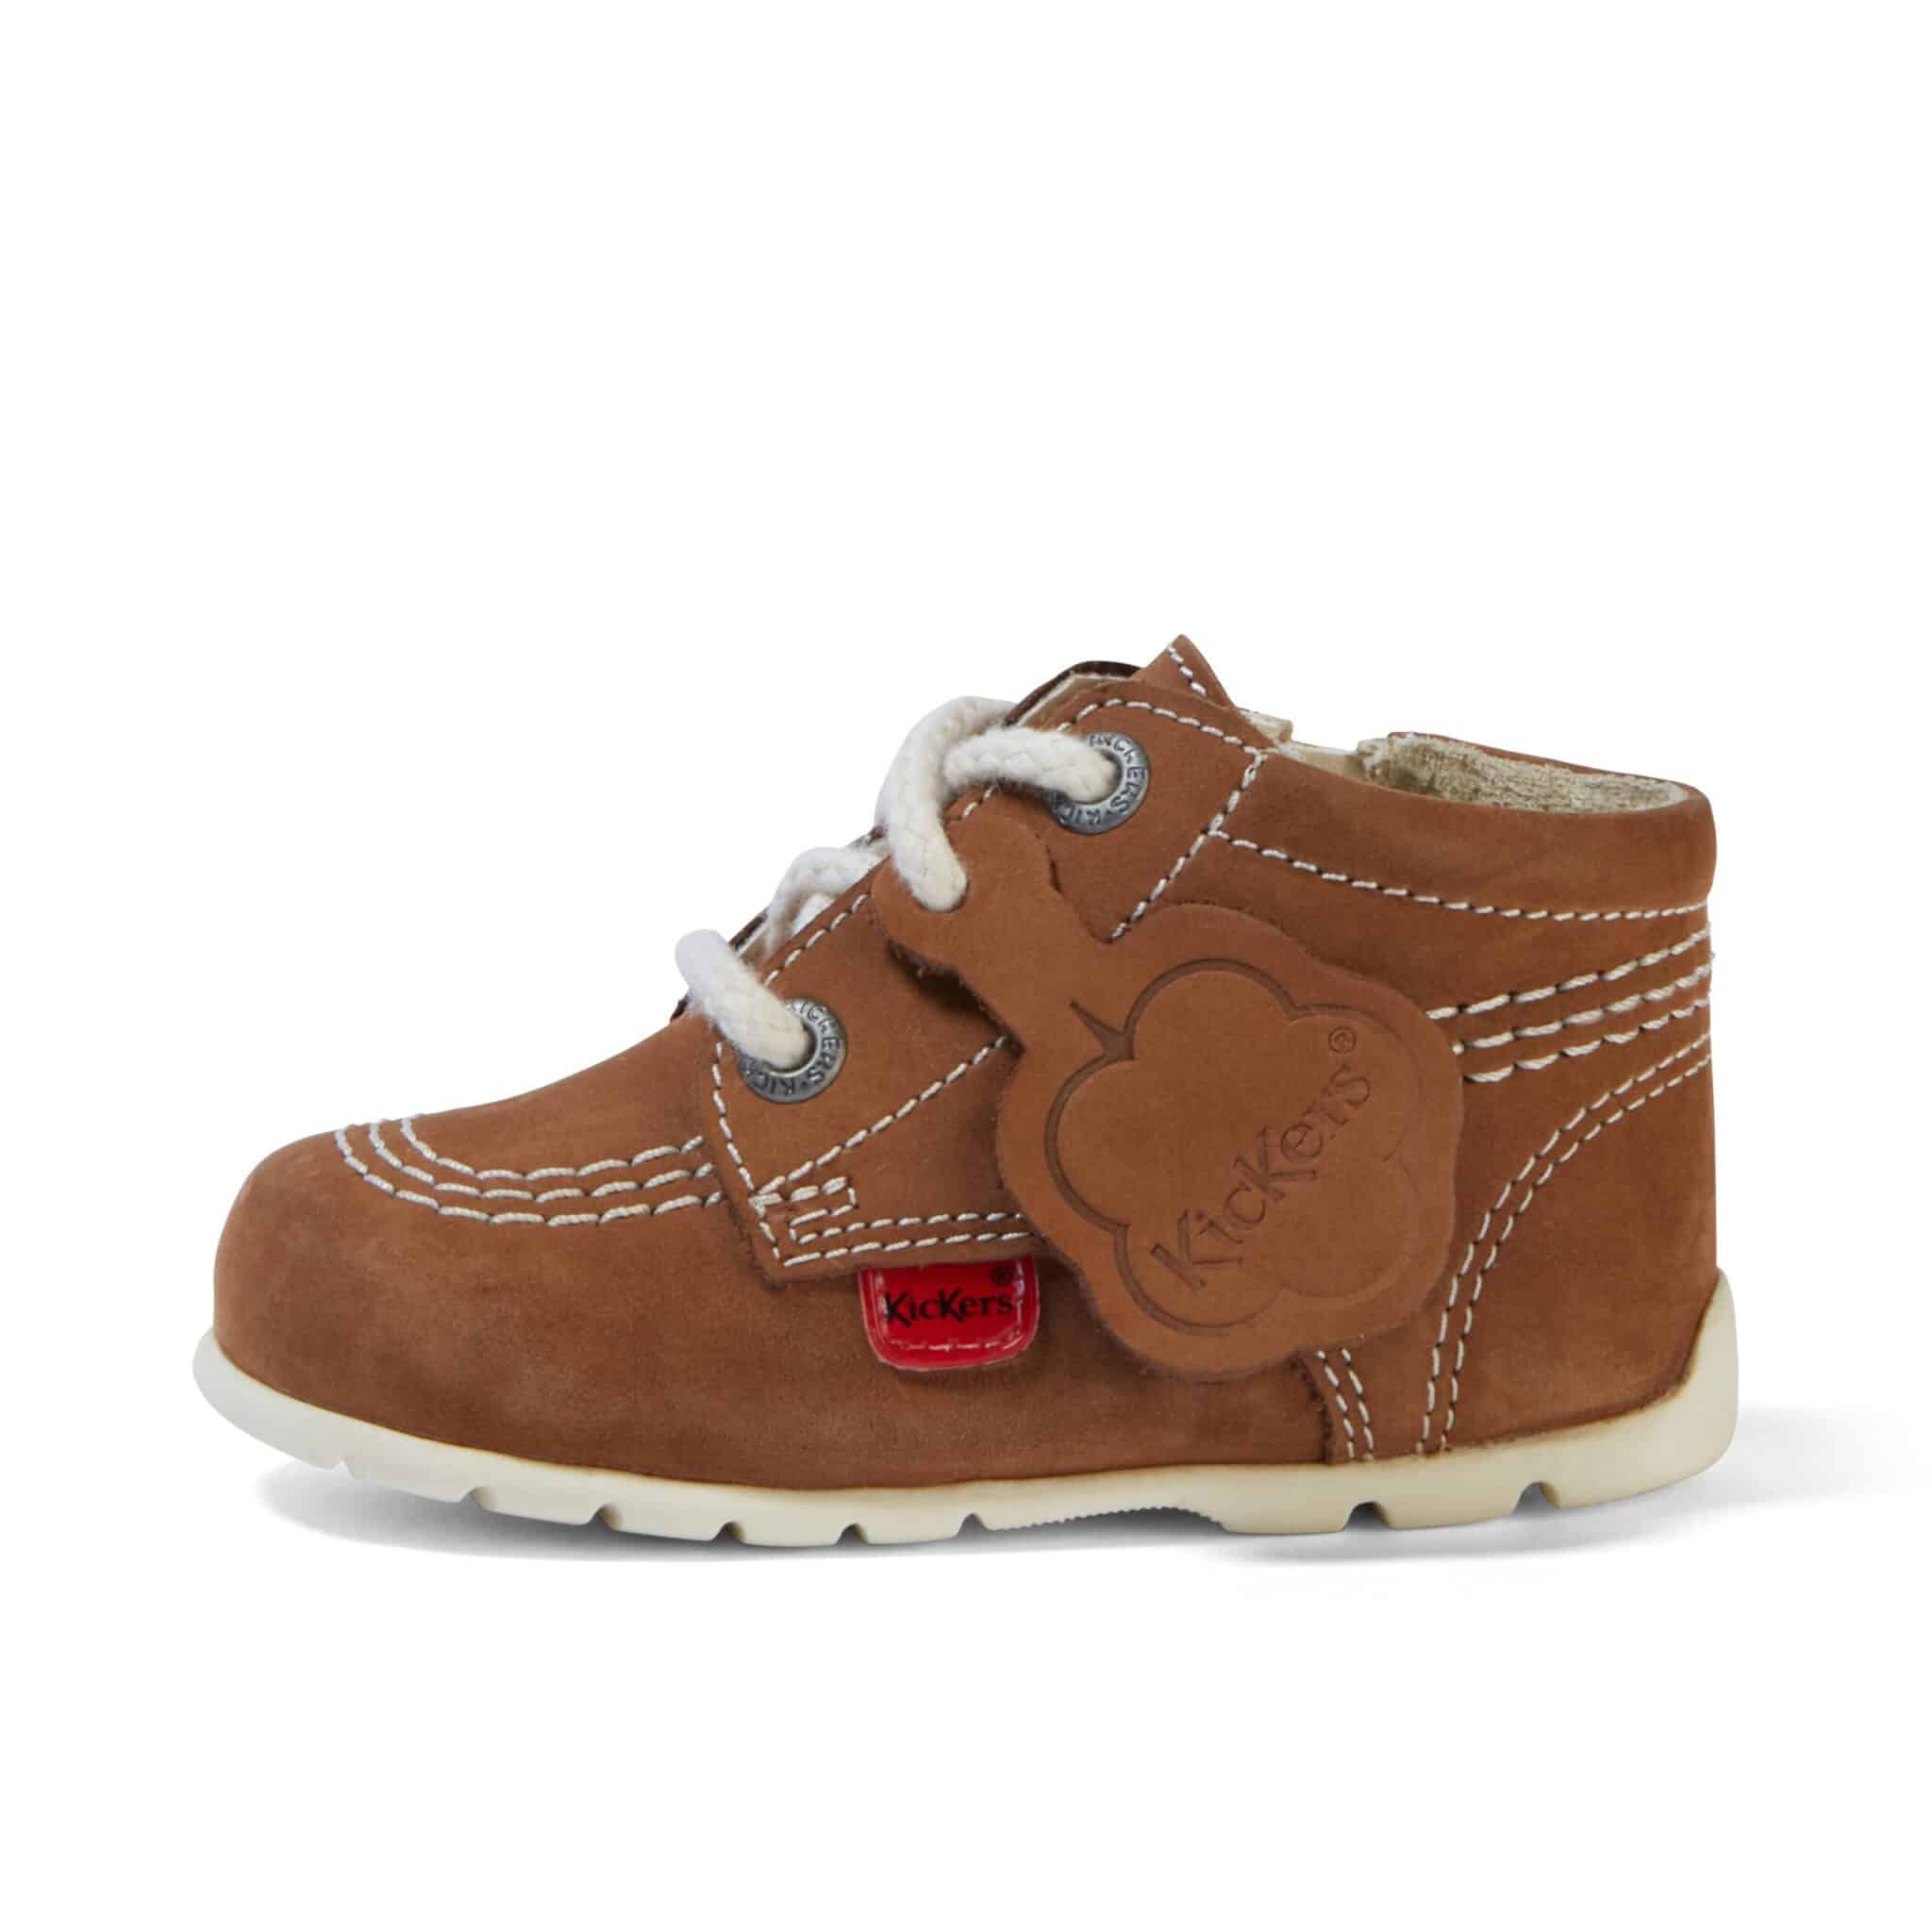 kickers boys brown shoe boots